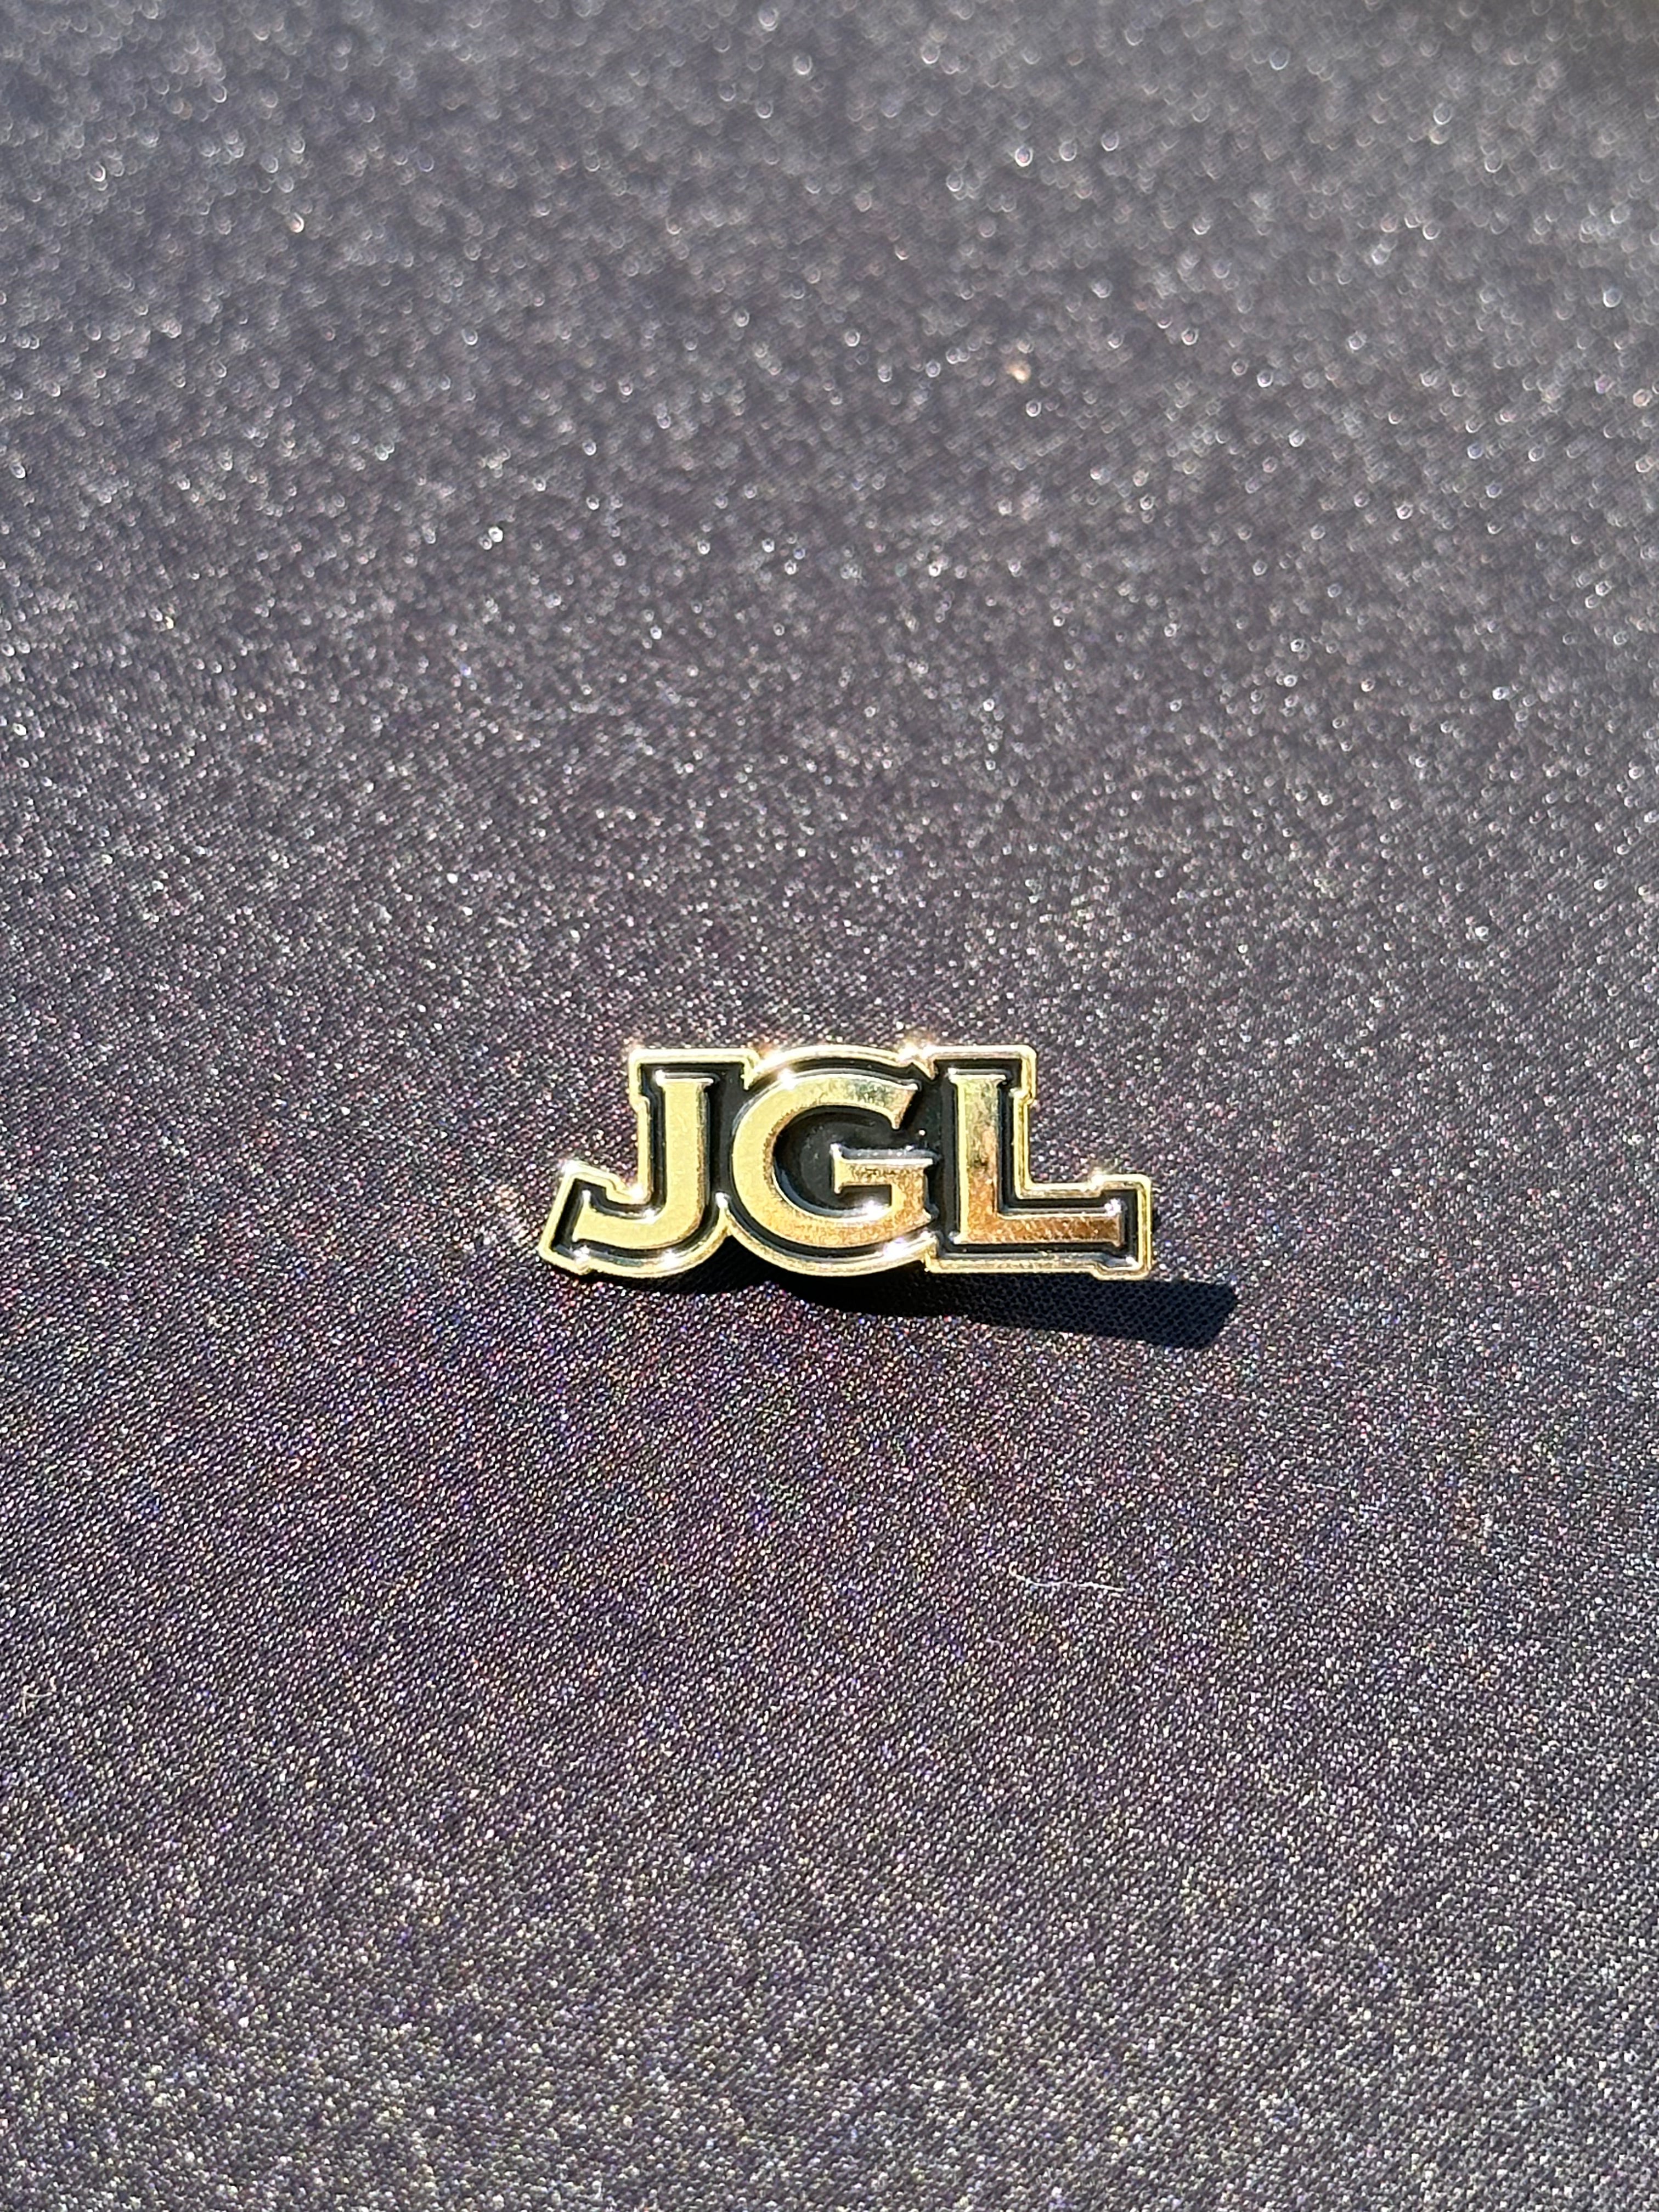 *NEW GOLD "J.G.L." EXCLUSIVE PIN VERY LIMITED